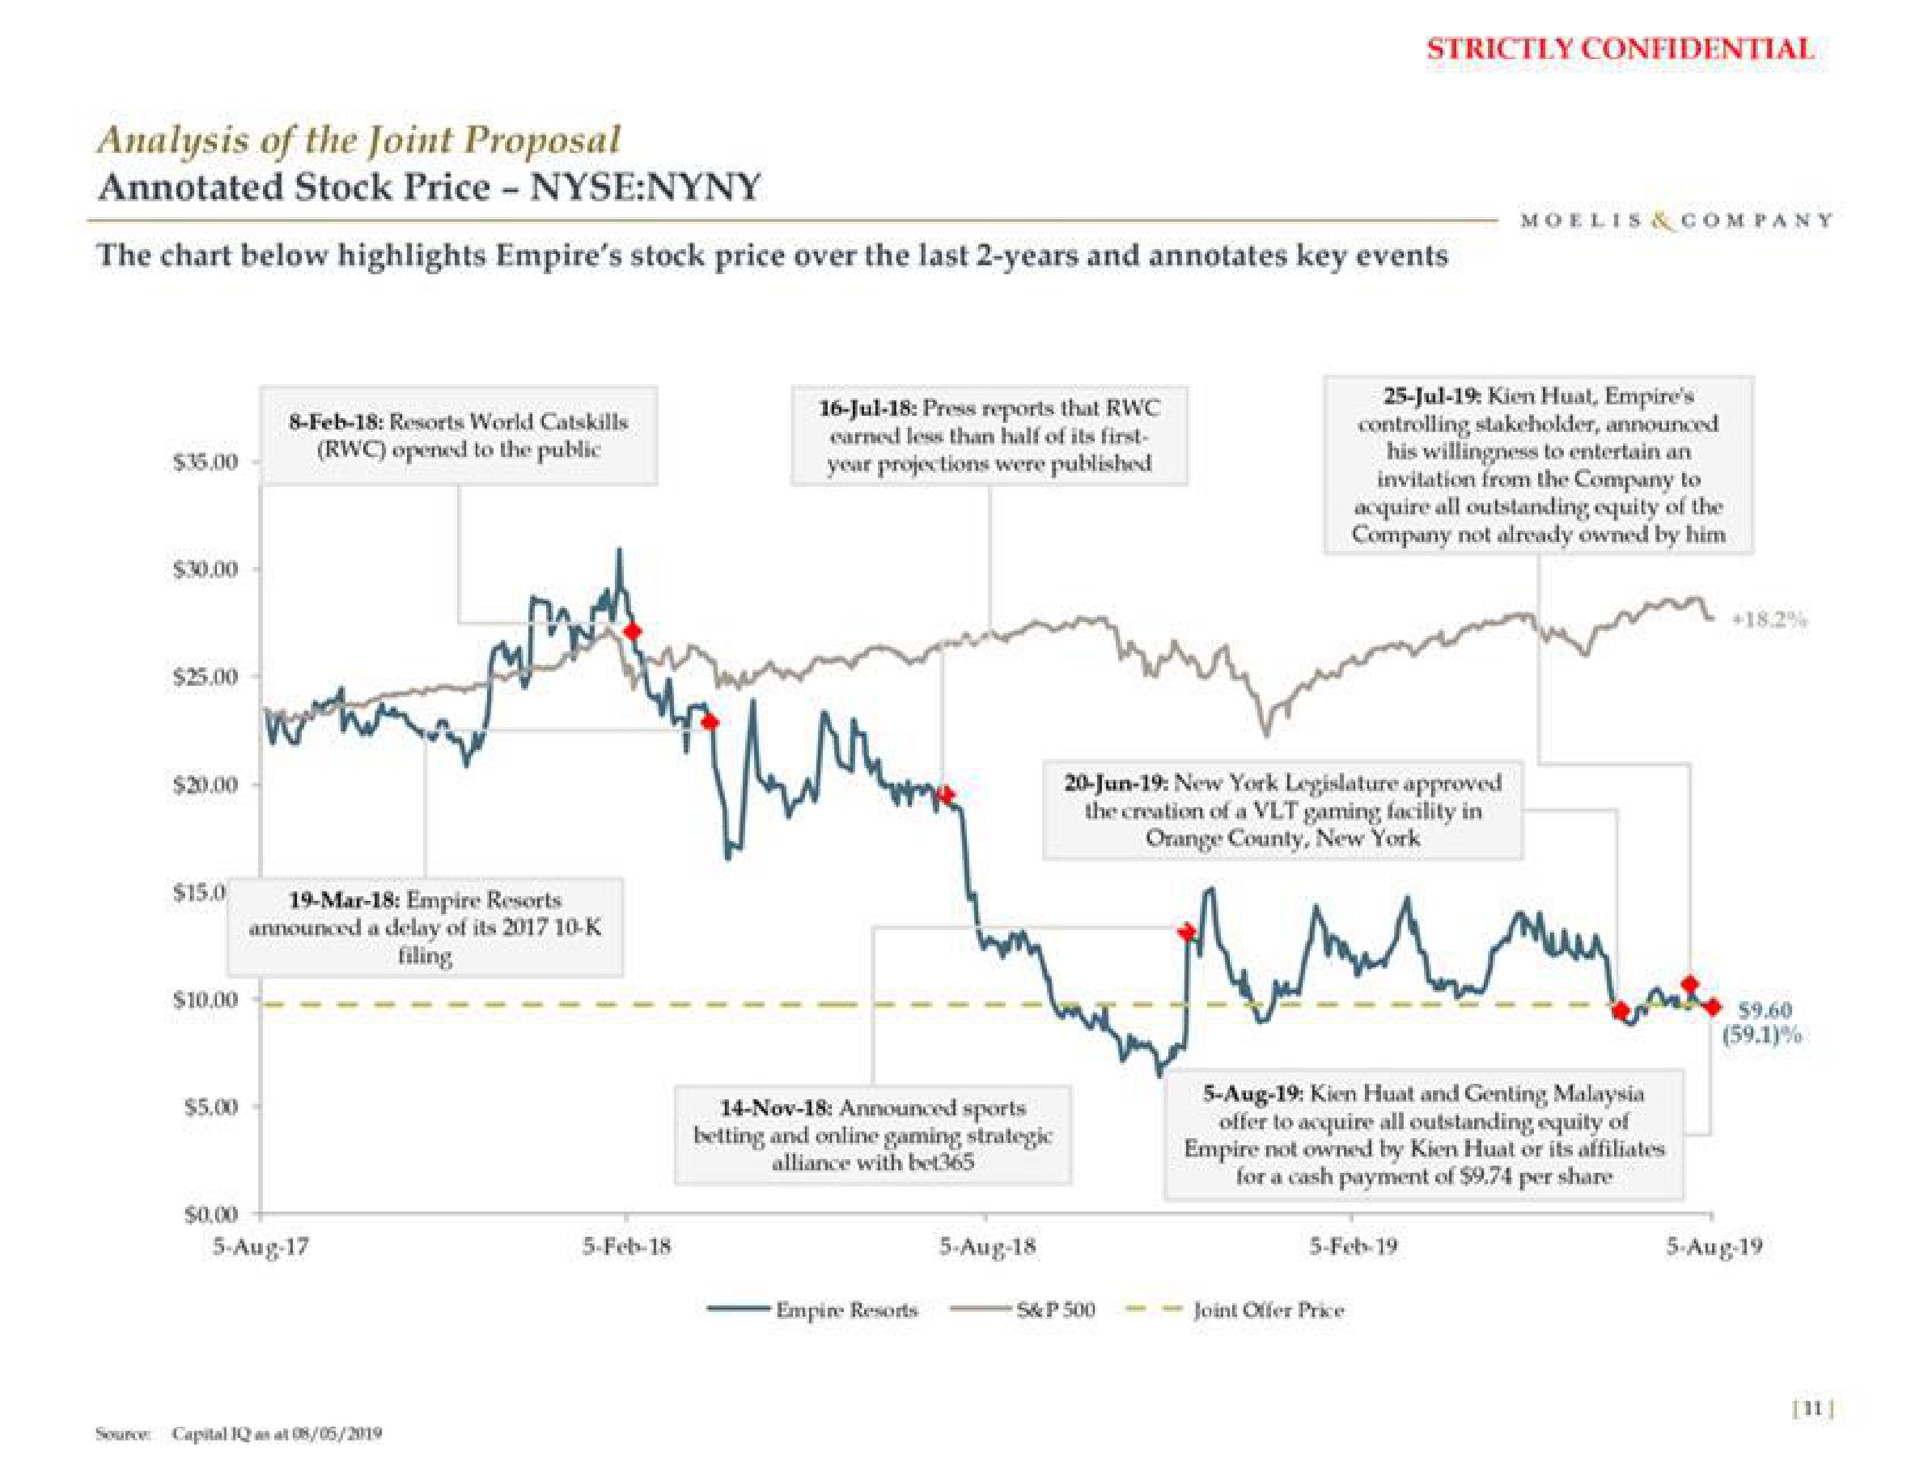 analysis of the joint proposal annotated stock price the chart below highlights empire stock price over the last years and annotates key events resorts world ree empire controlling stakeholder announced mar empire resorts empire not owned by or its | Moelis & Company